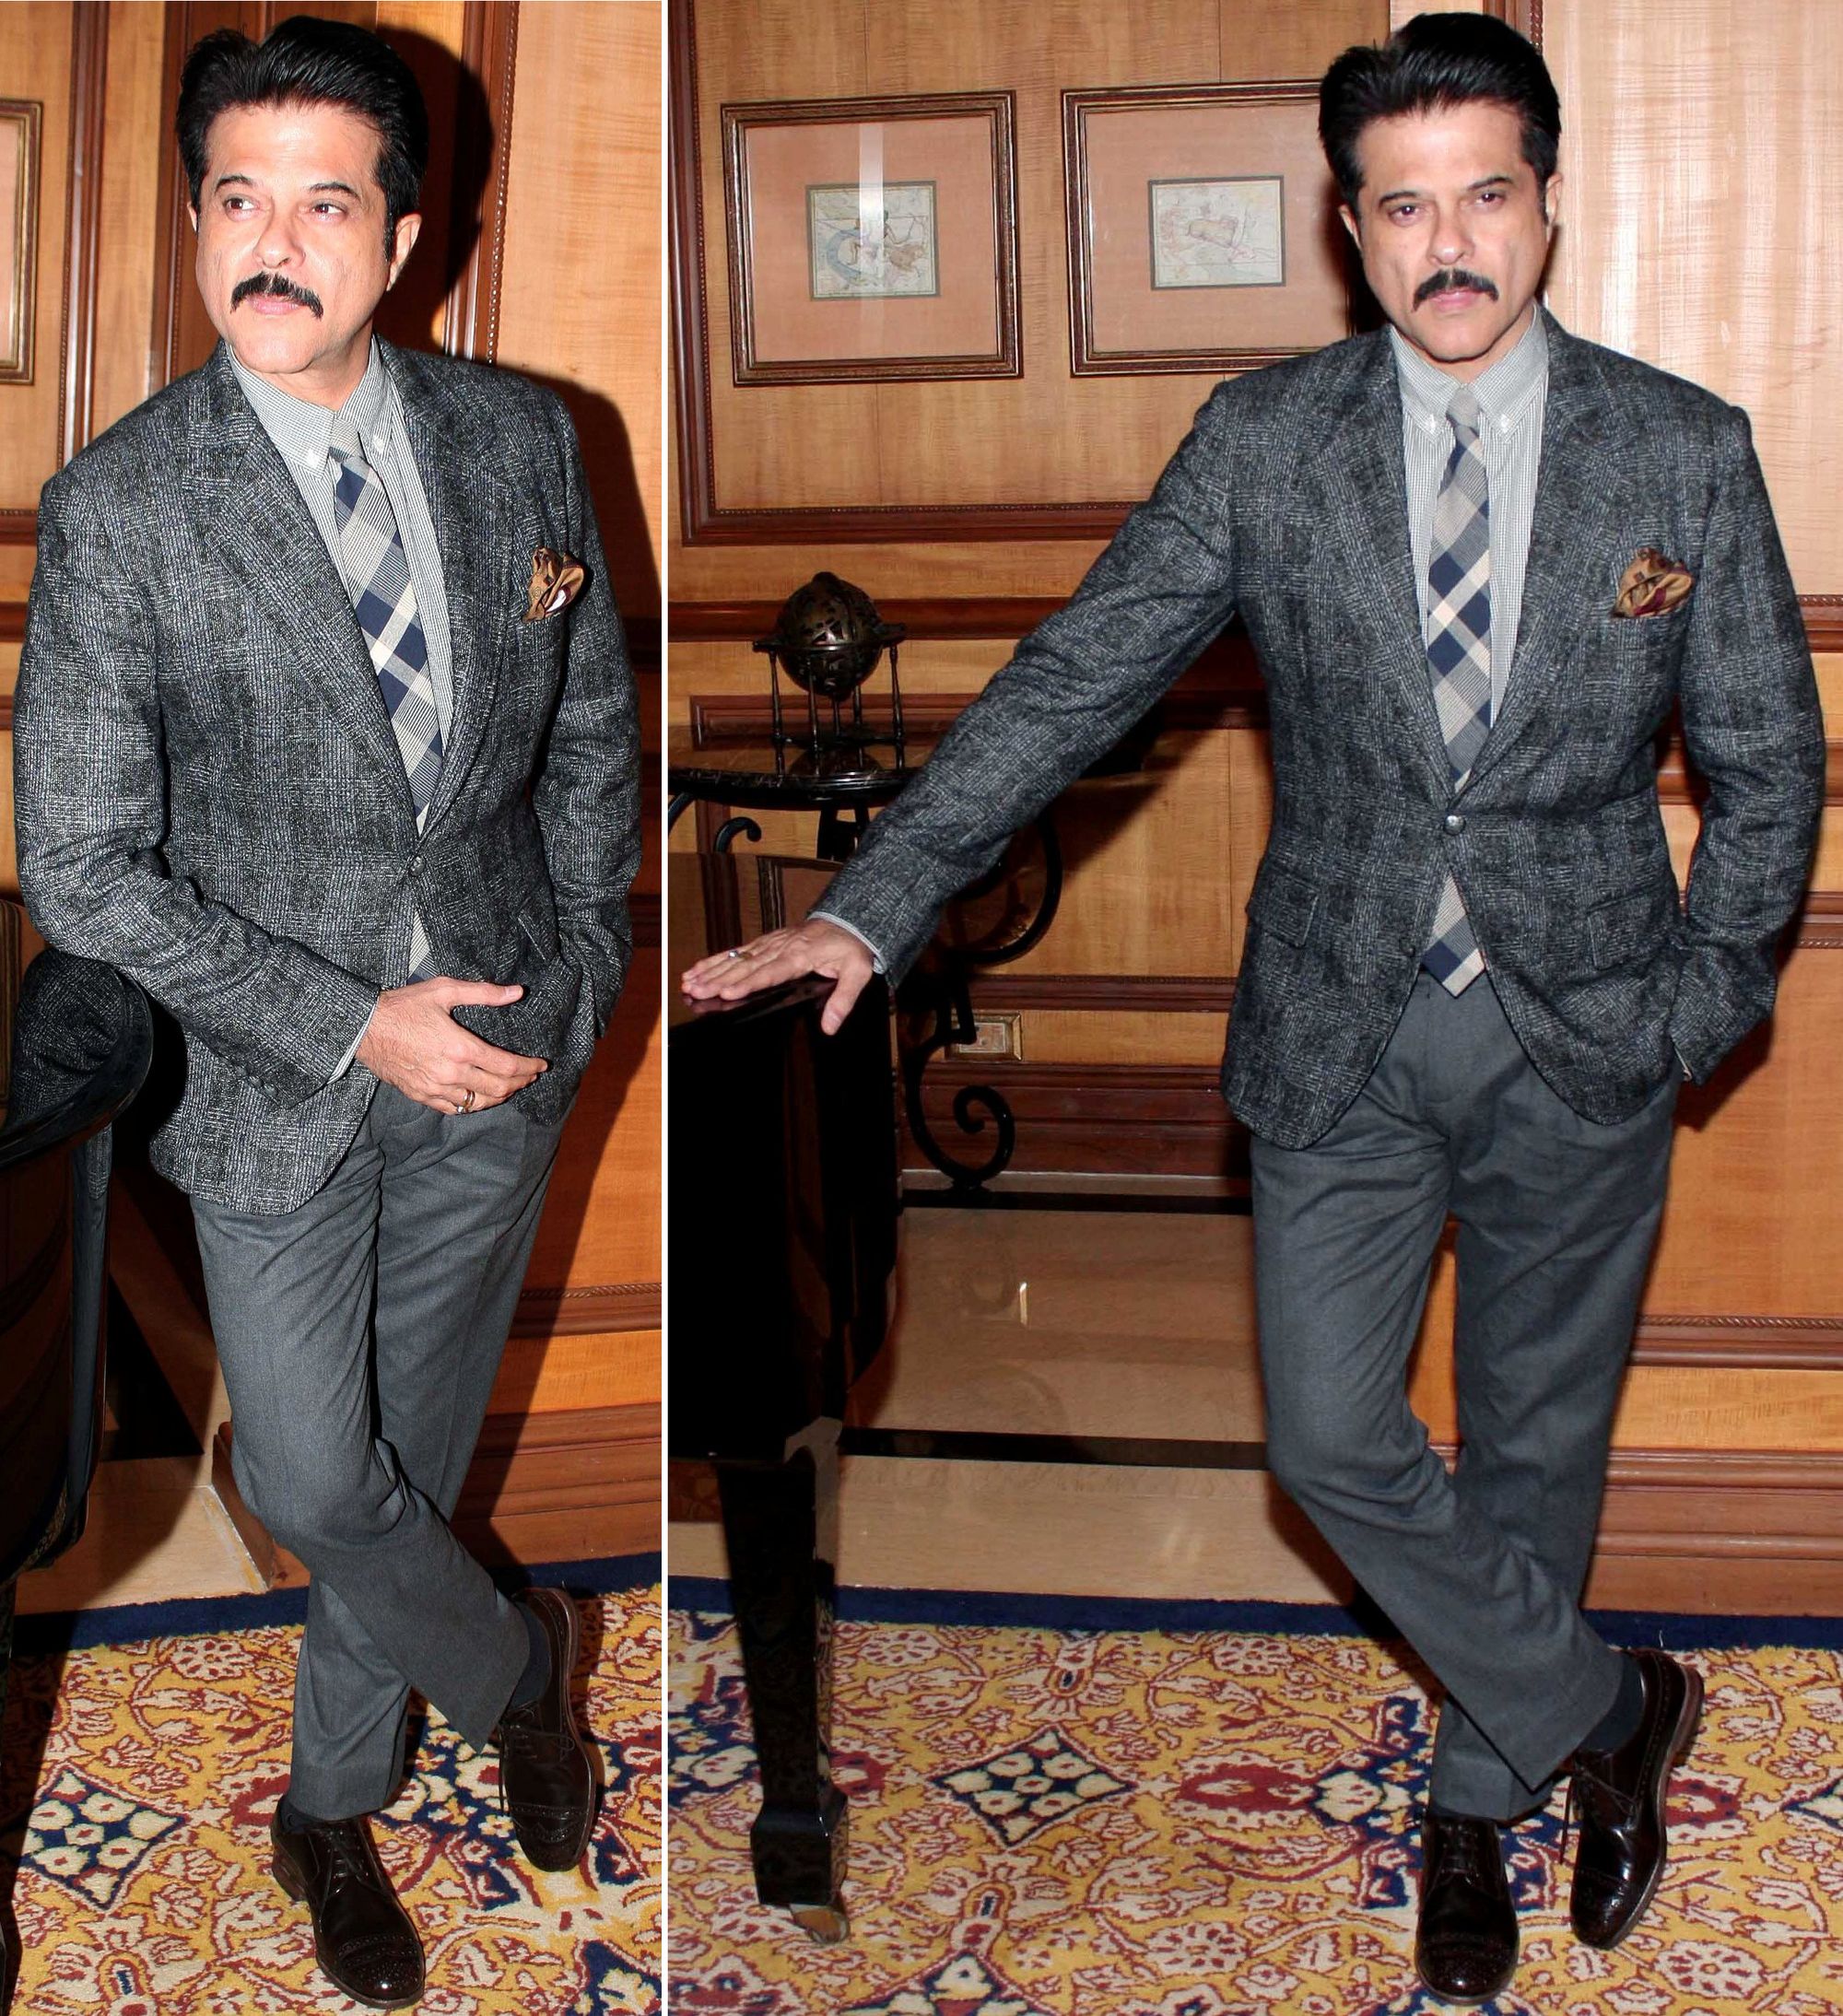 Anil Kapoor at the 2012 Veuve Clicquot Business Woman Award